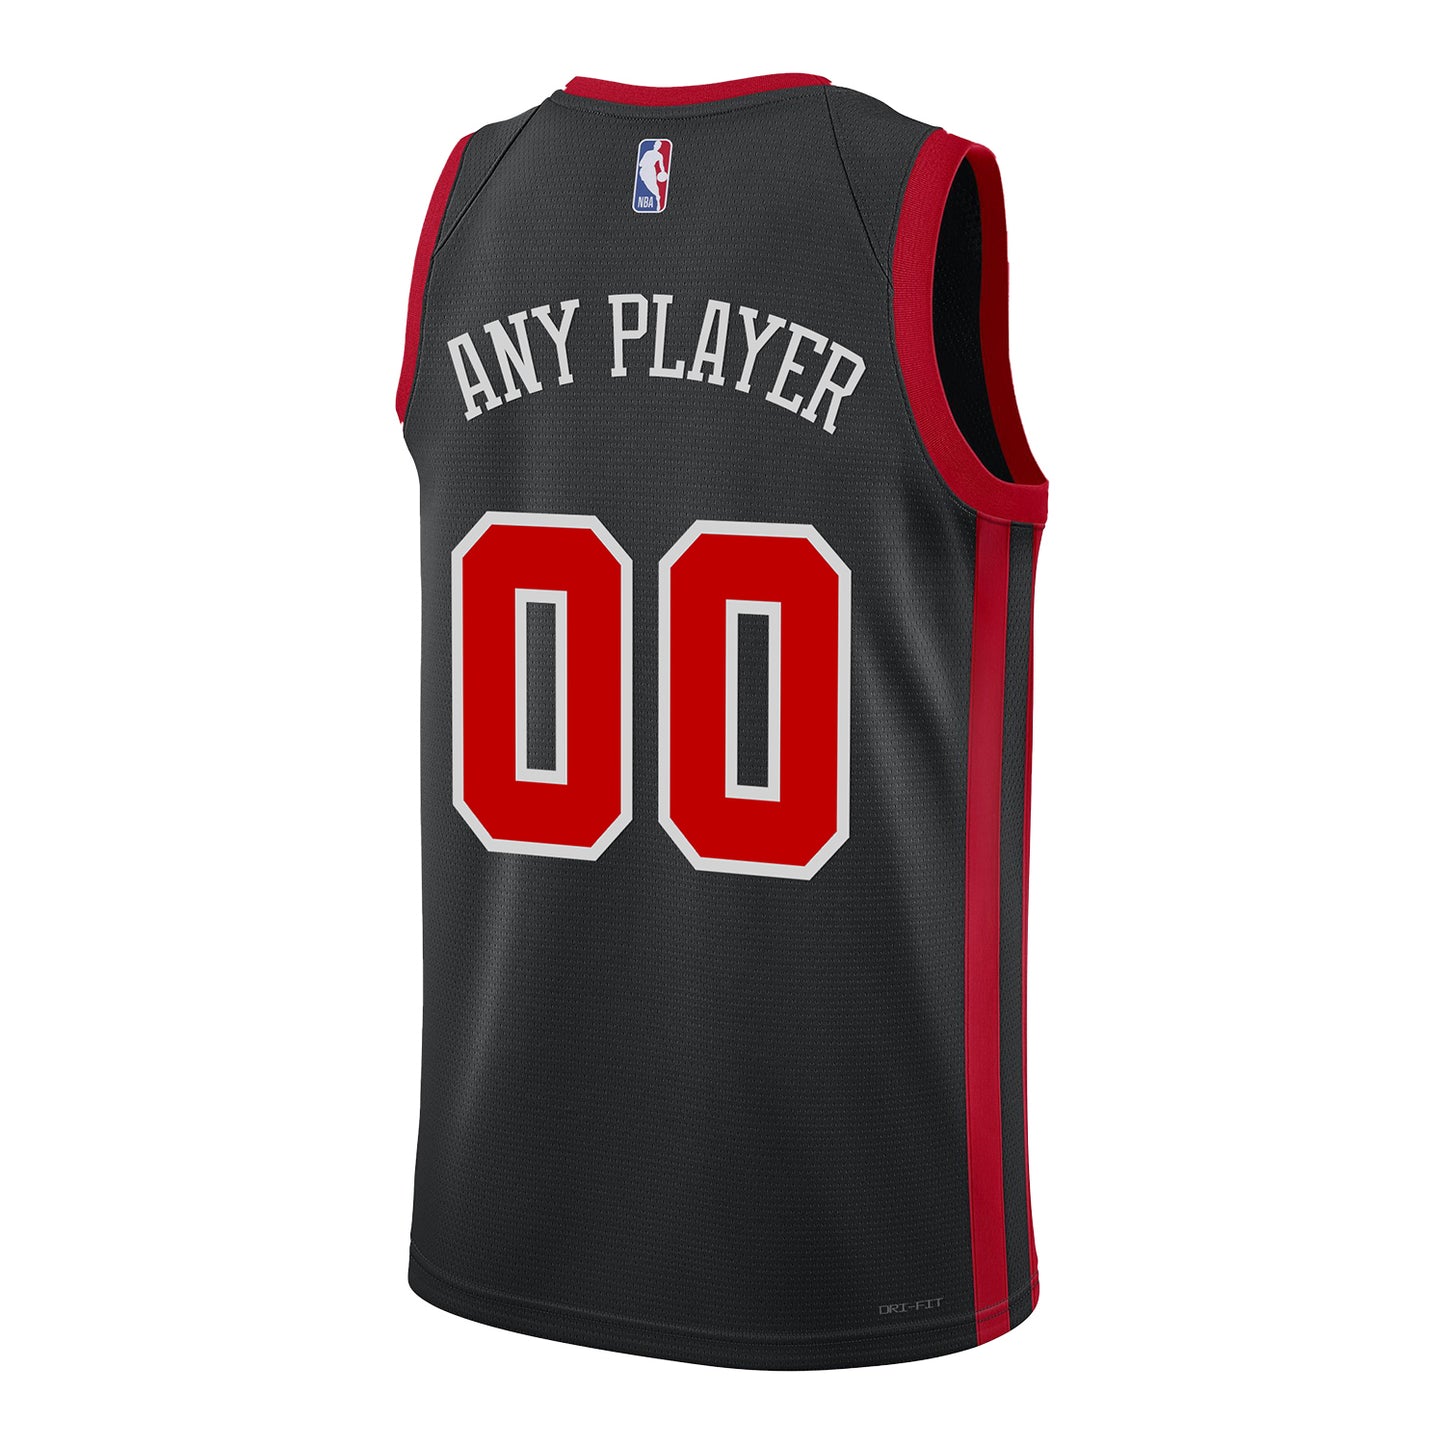 2023-24 CHICAGO BULLS PERSONALIZED CITY EDITION YOUTH UNIFORM - back view